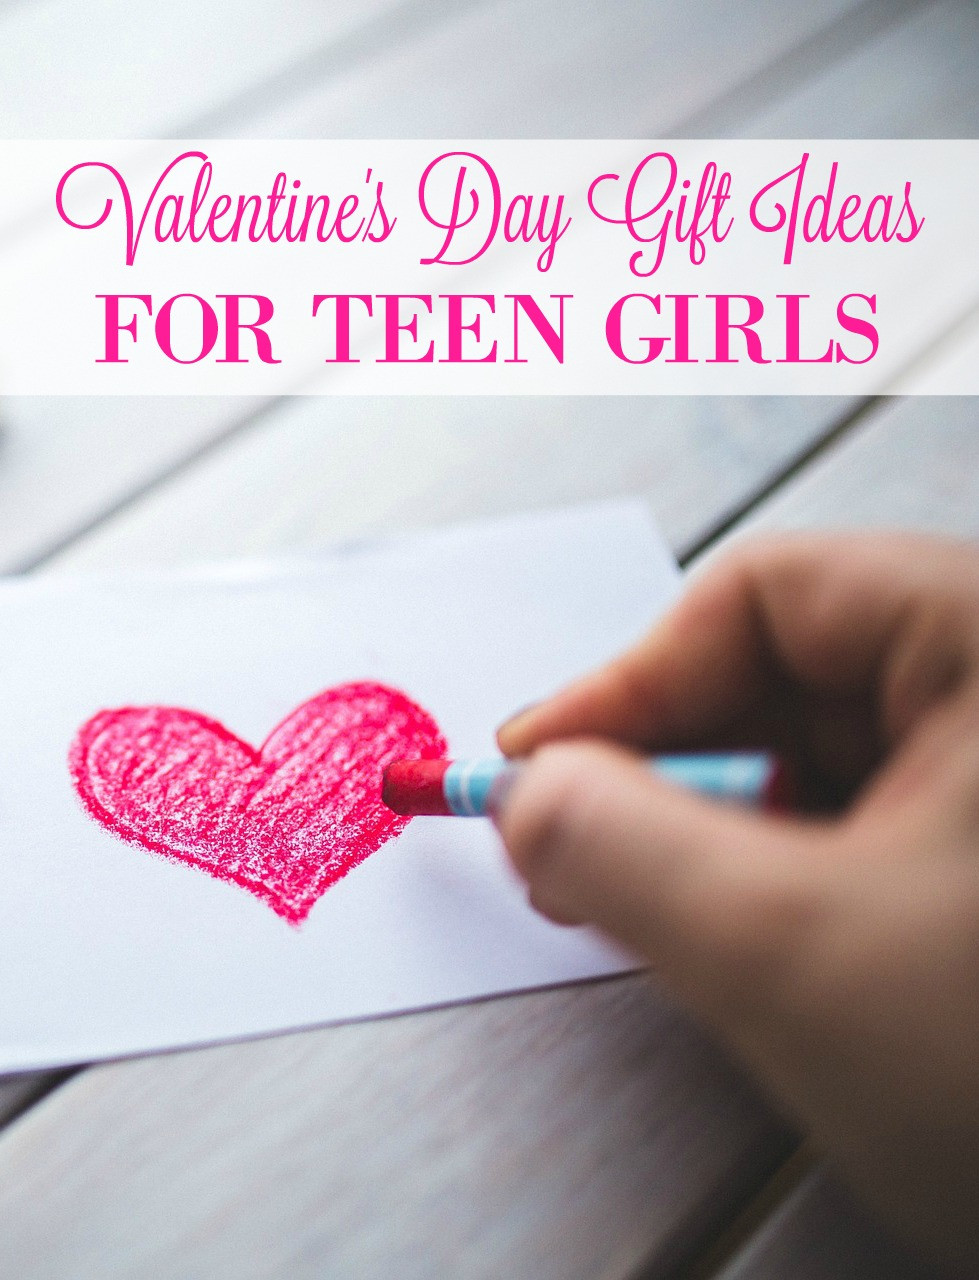 Girls Valentine Gift Ideas
 Valentine s Day Gift Ideas for Girls Beyond Chocolate And